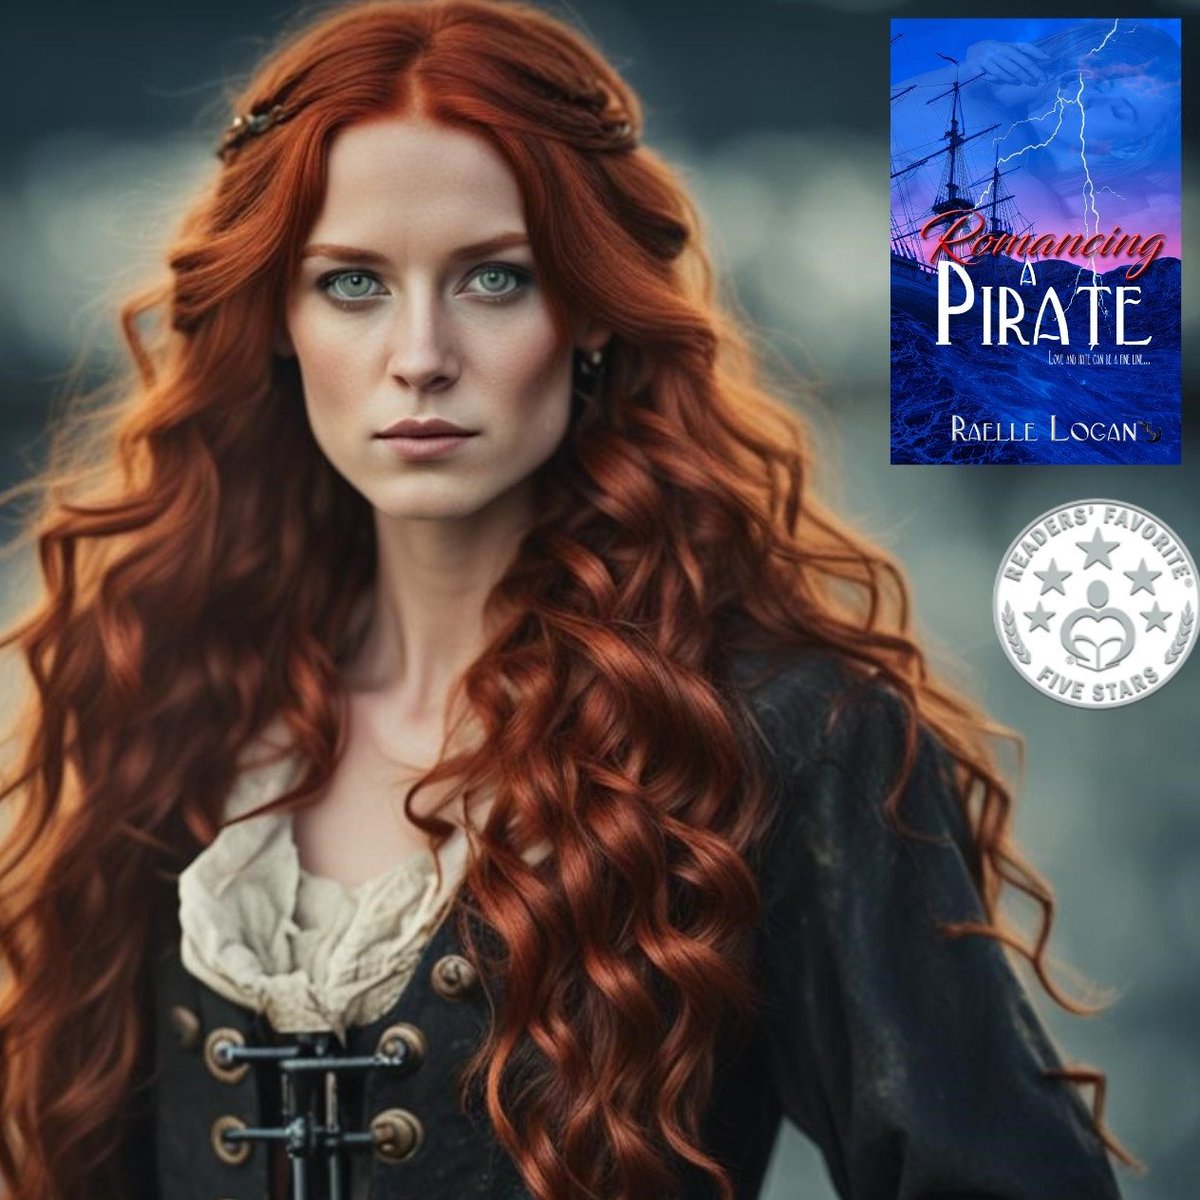 Lone Stafford sails on a quest to bring justice to her father's slayer. When she falls into Hunter Draylin's embrace, a pirate whose lusty caress she cannot resist, will she be seduced into an evil web, dying at the sword wielded by her father's killer? #romance #booklovers